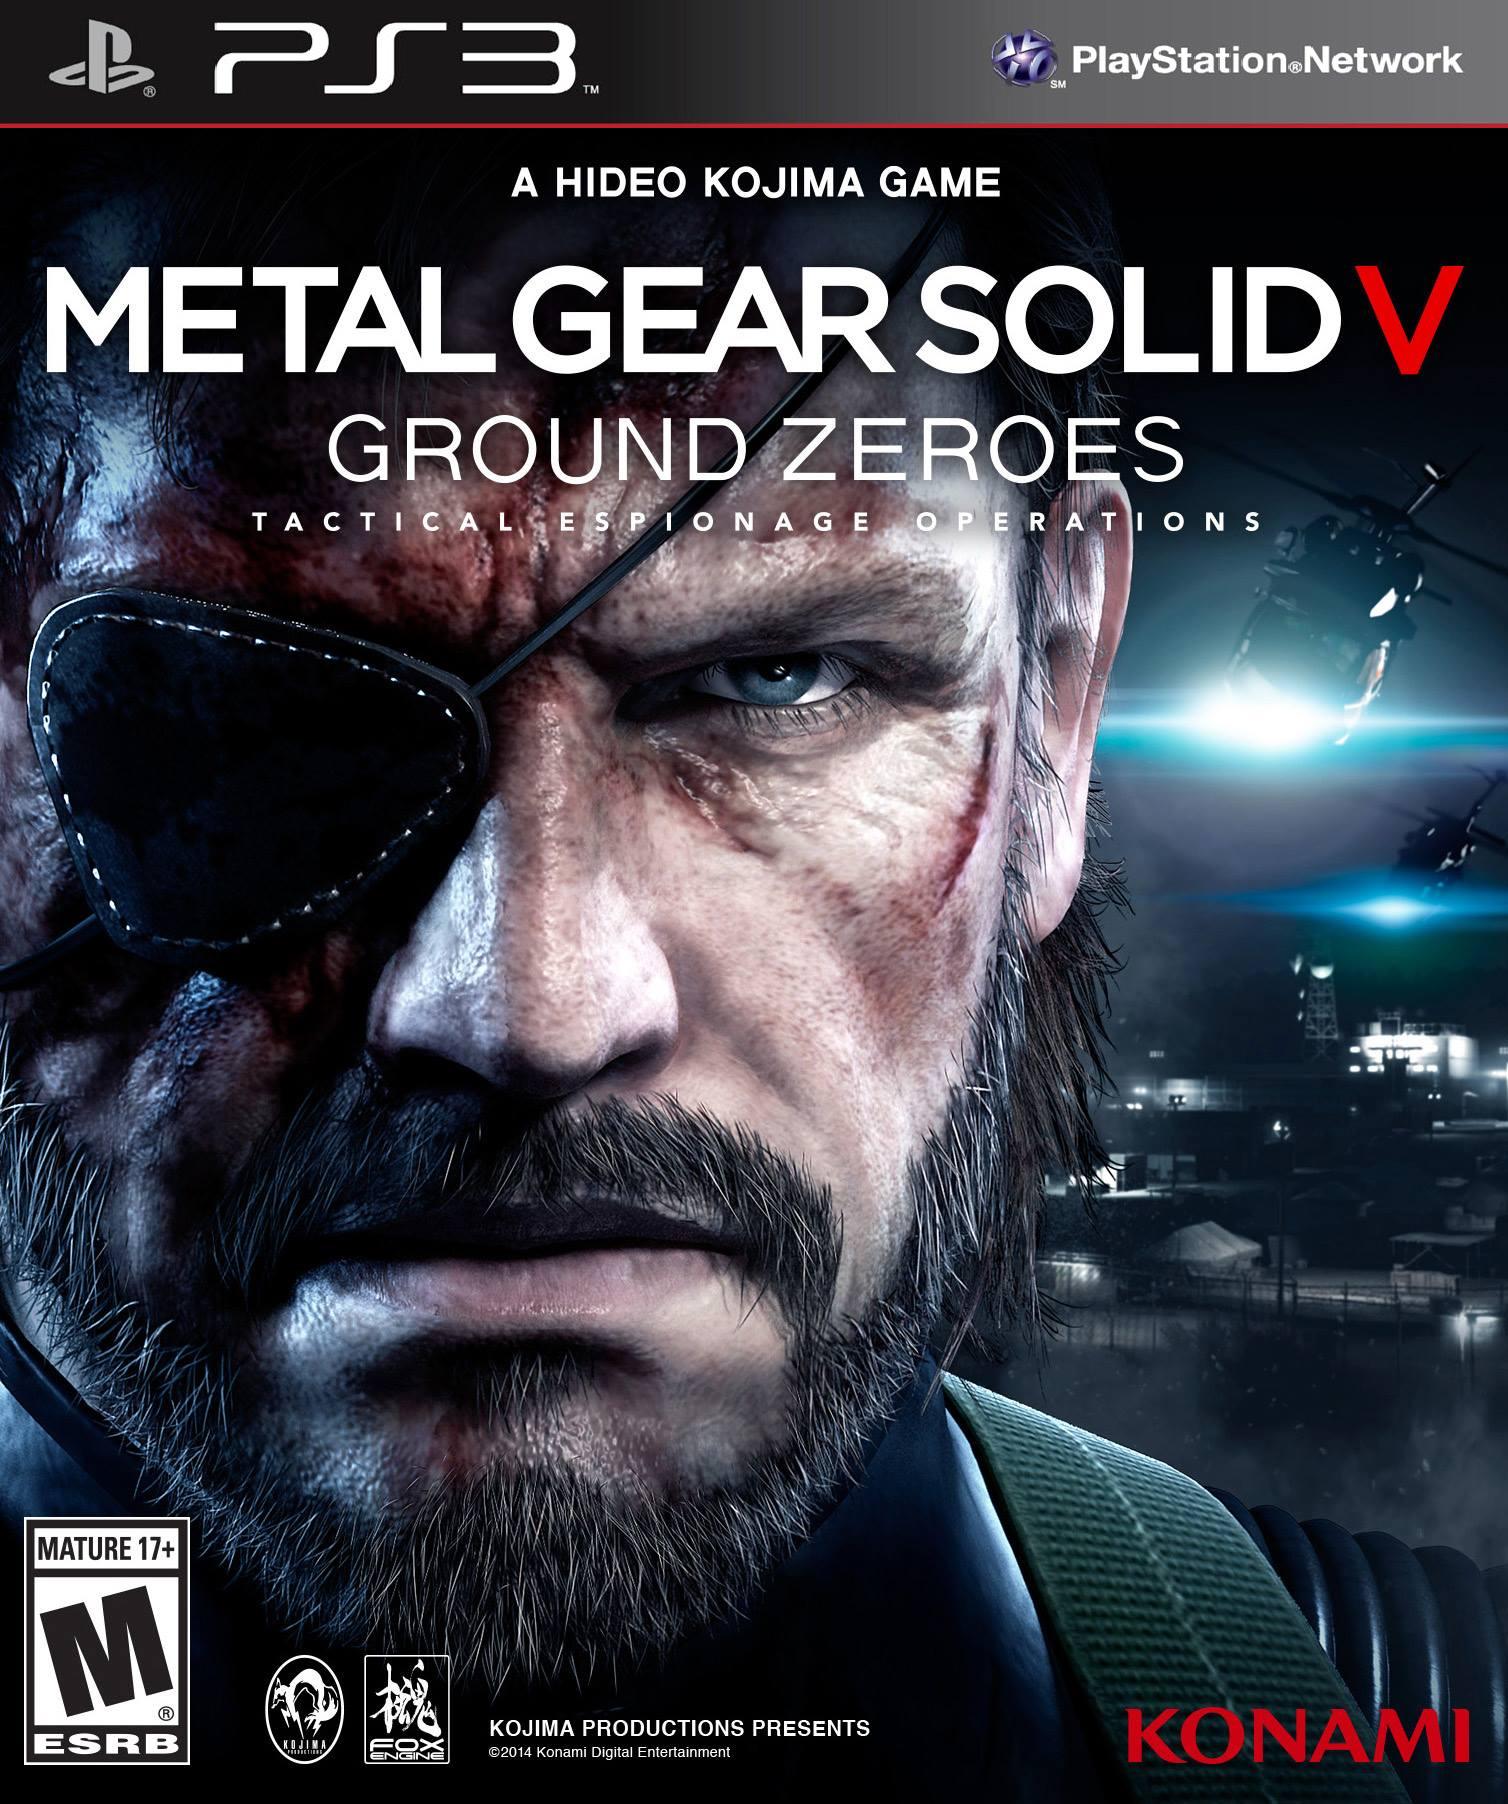 move slowly metal gear solid 5 pc